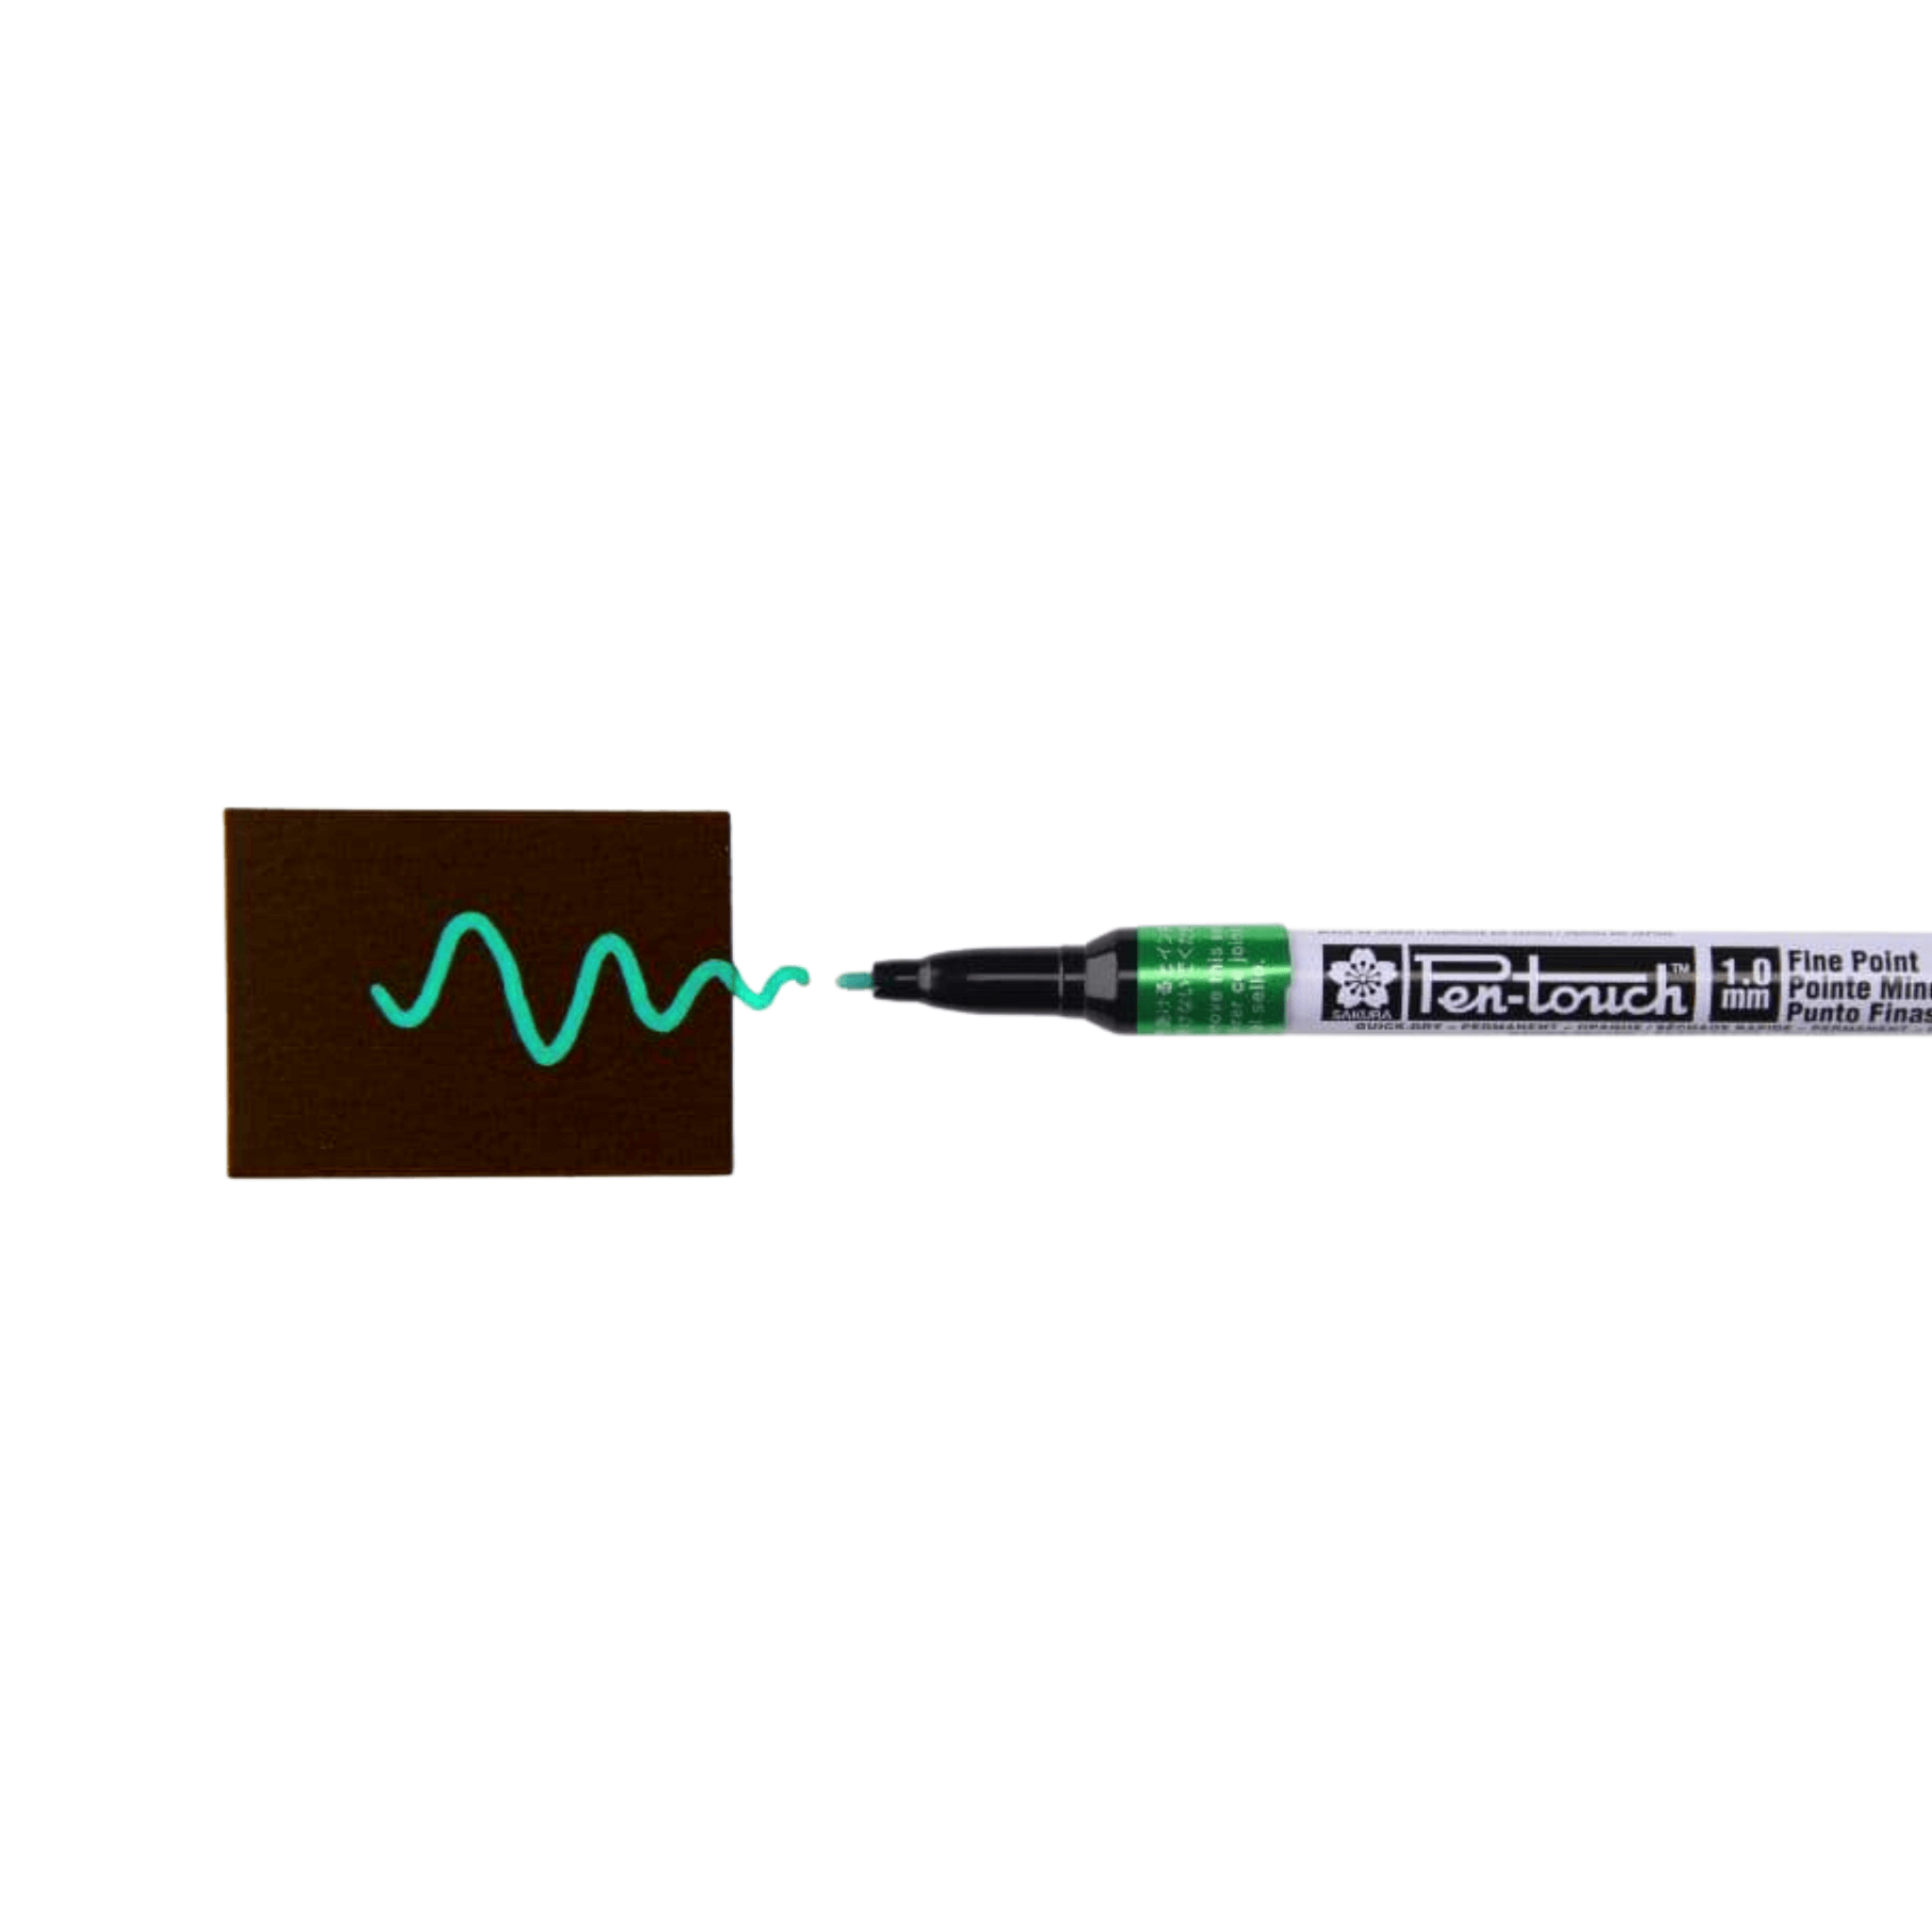 Sakura Pen-Touch Paint Marker - Fine Point 1.0 mm - Green - The Pigeon Letters